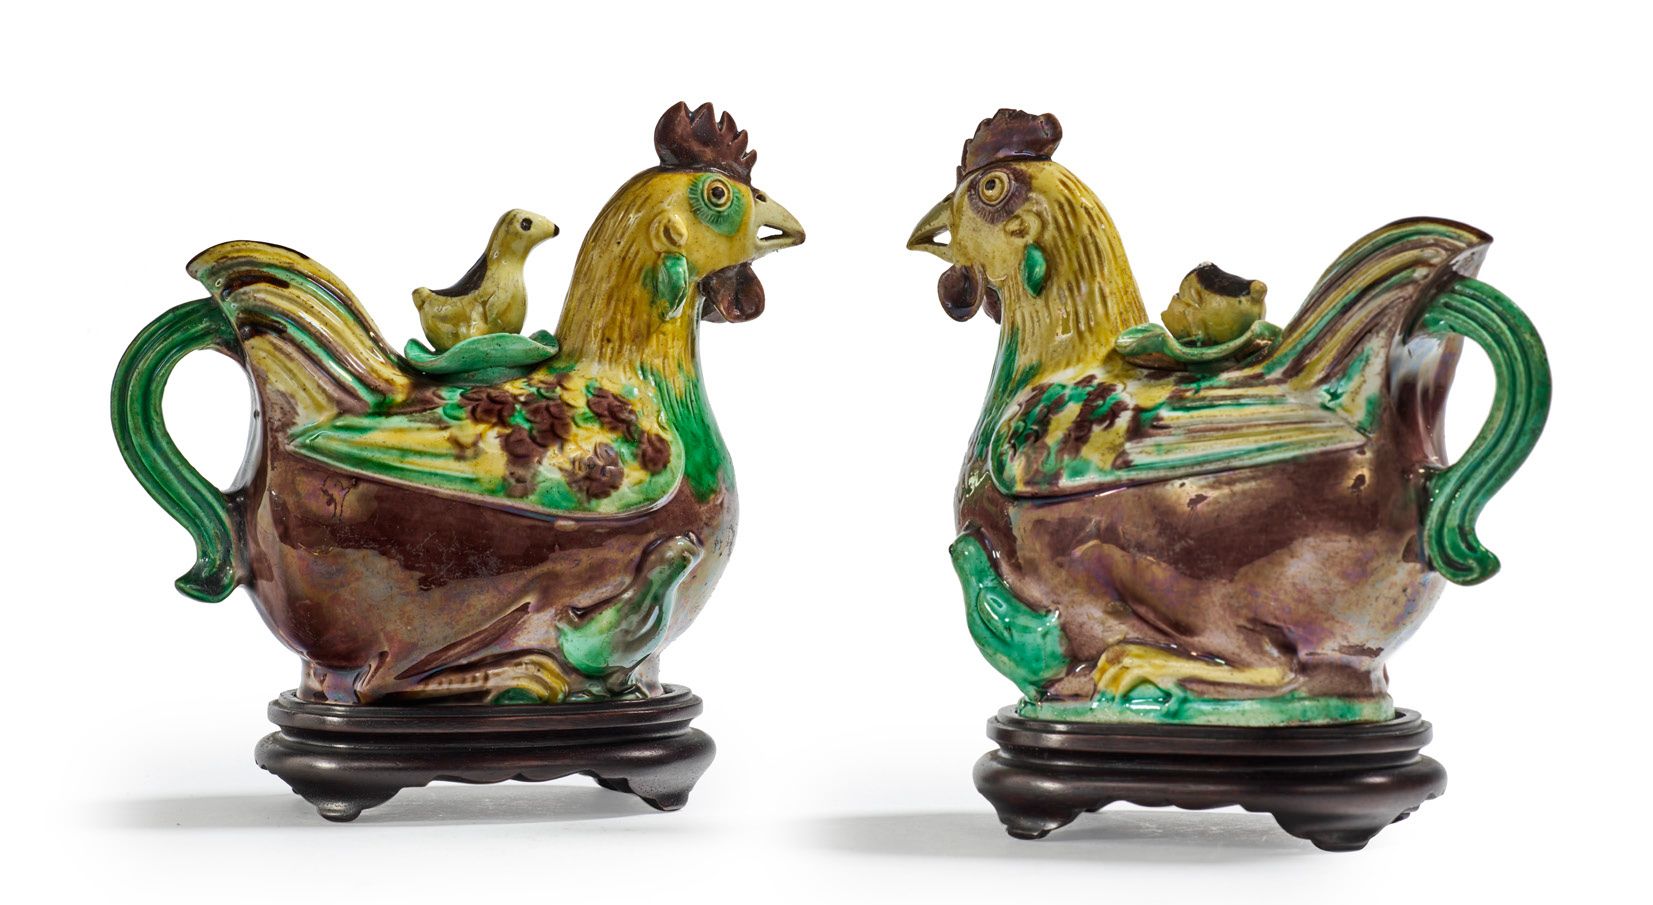 CHINE XVIIIe SIÈCLE, PÉRIODE KANGXI (1661 - 1722) 
A pair of rooster-shaped teap&hellip;